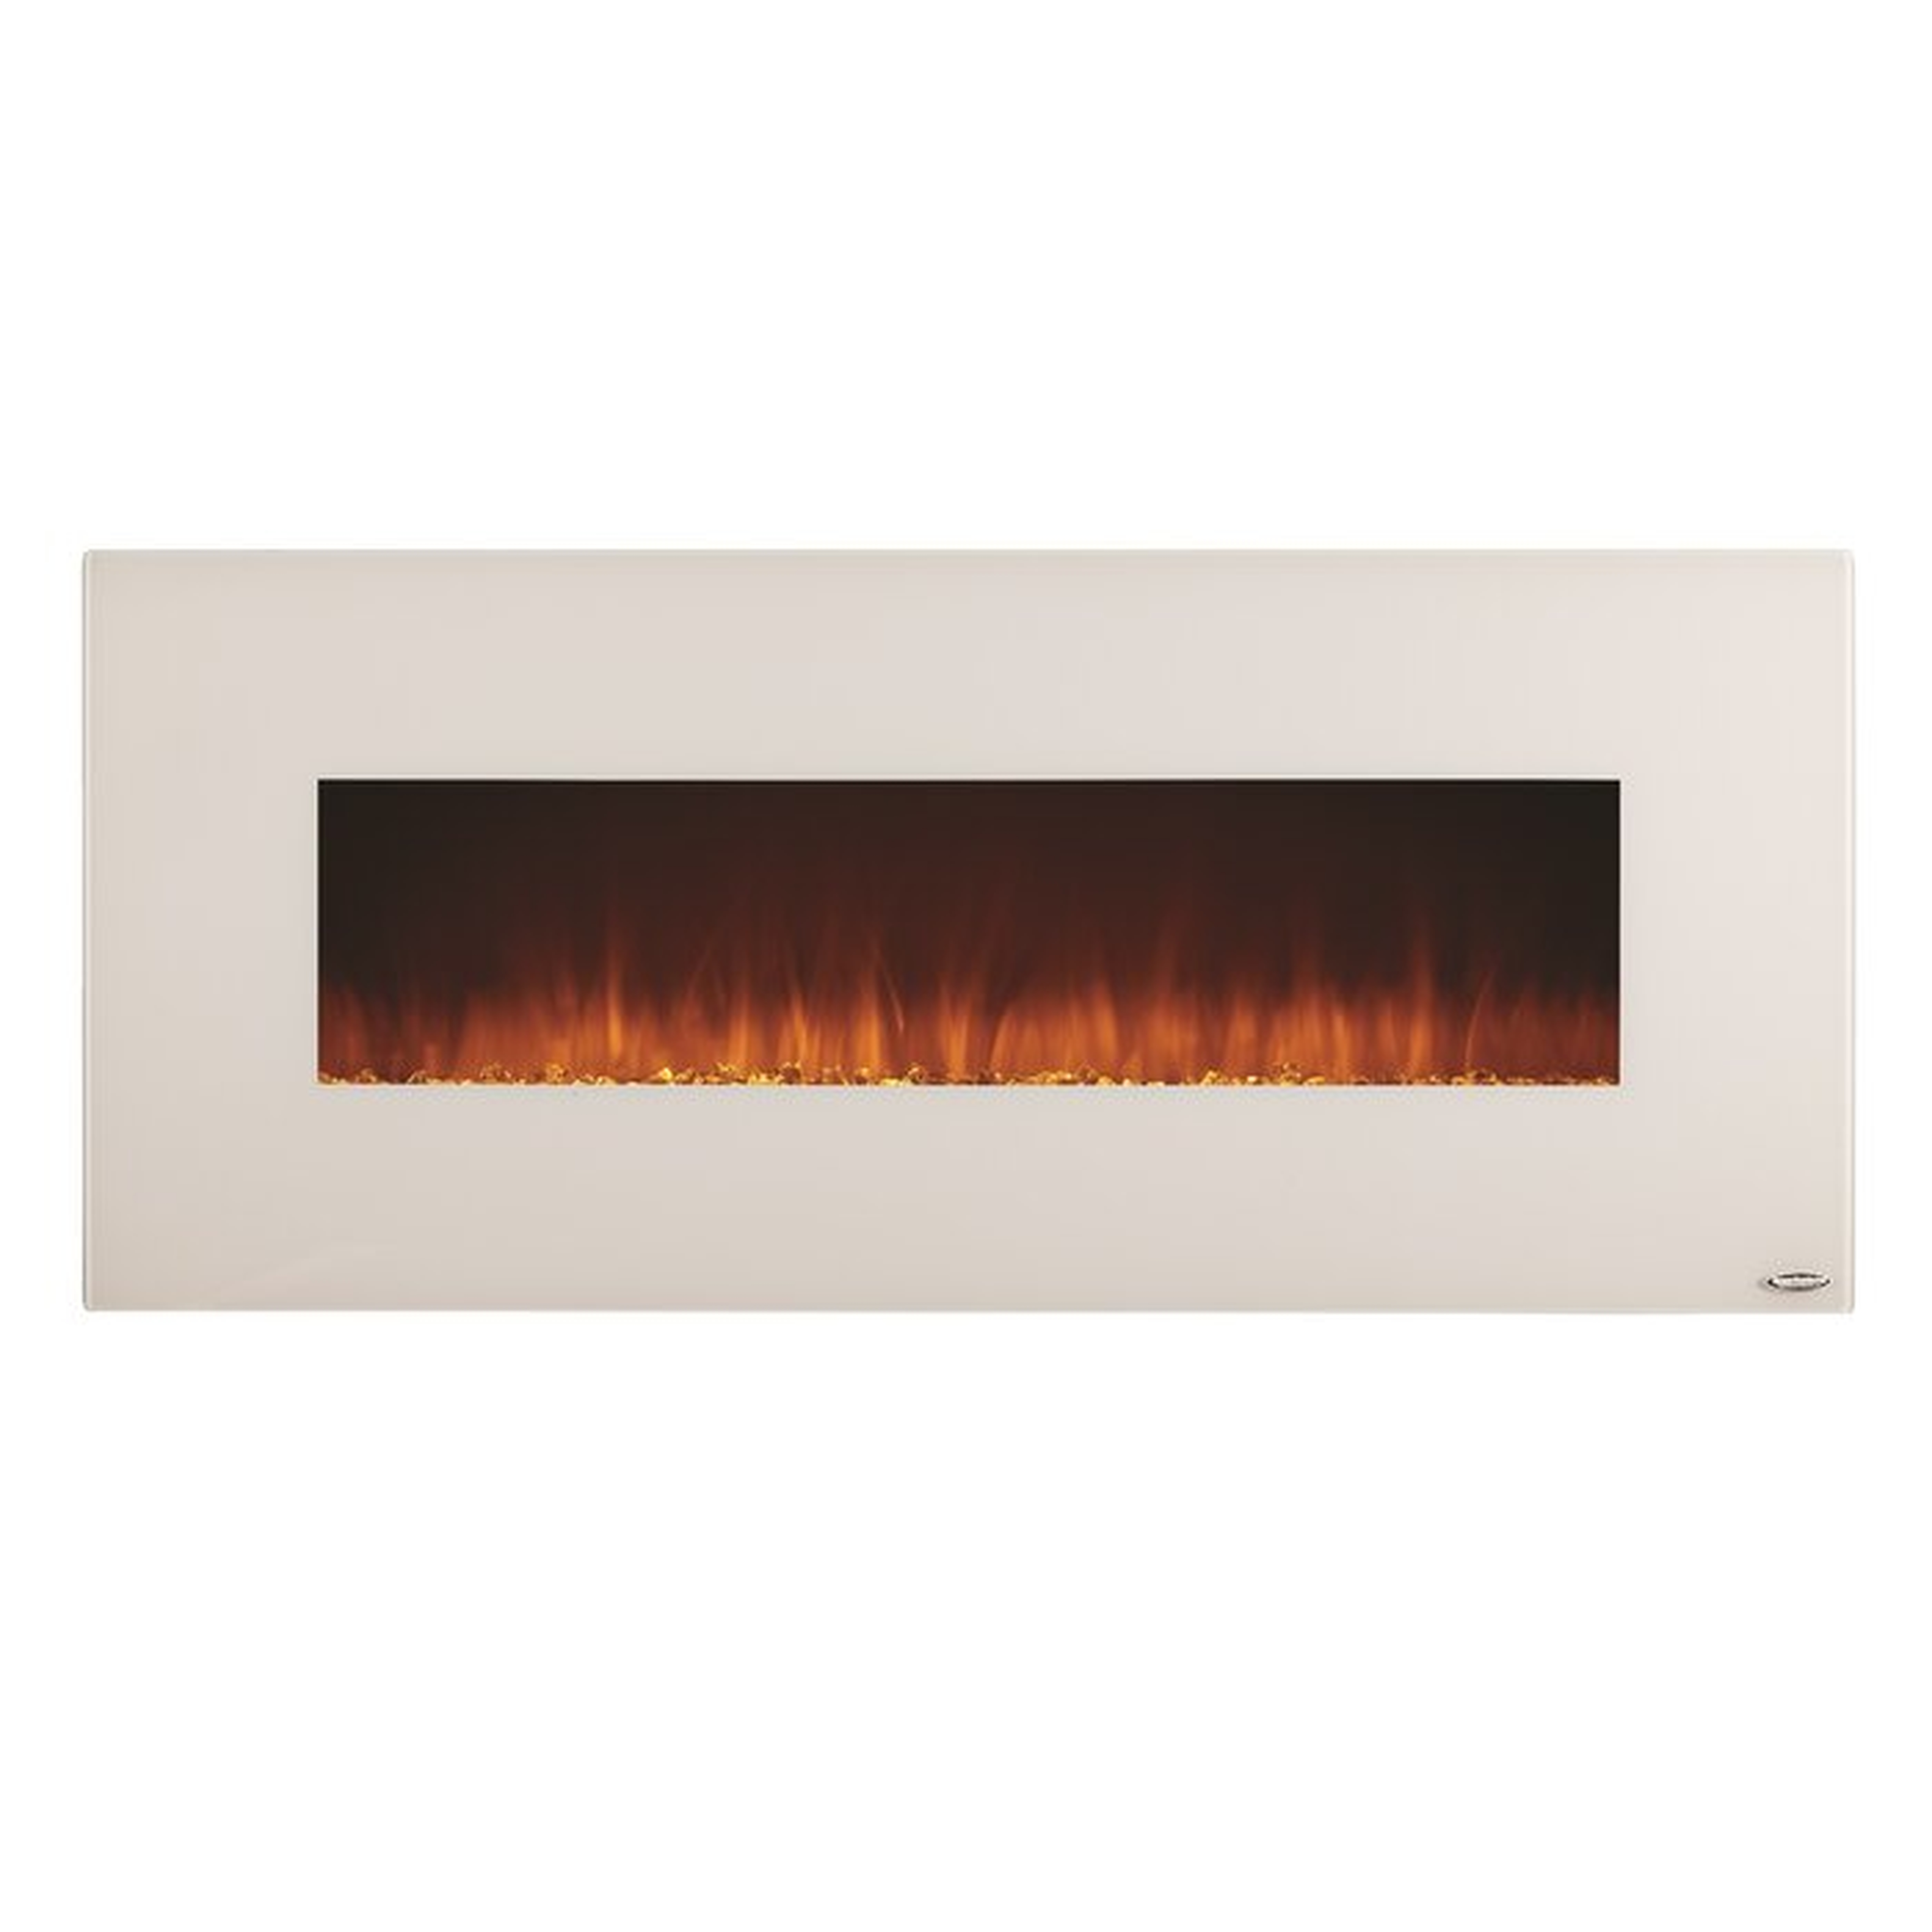 Lauderhill Wall Mounted Electric Fireplace See More by Zipcode Design™ - Wayfair